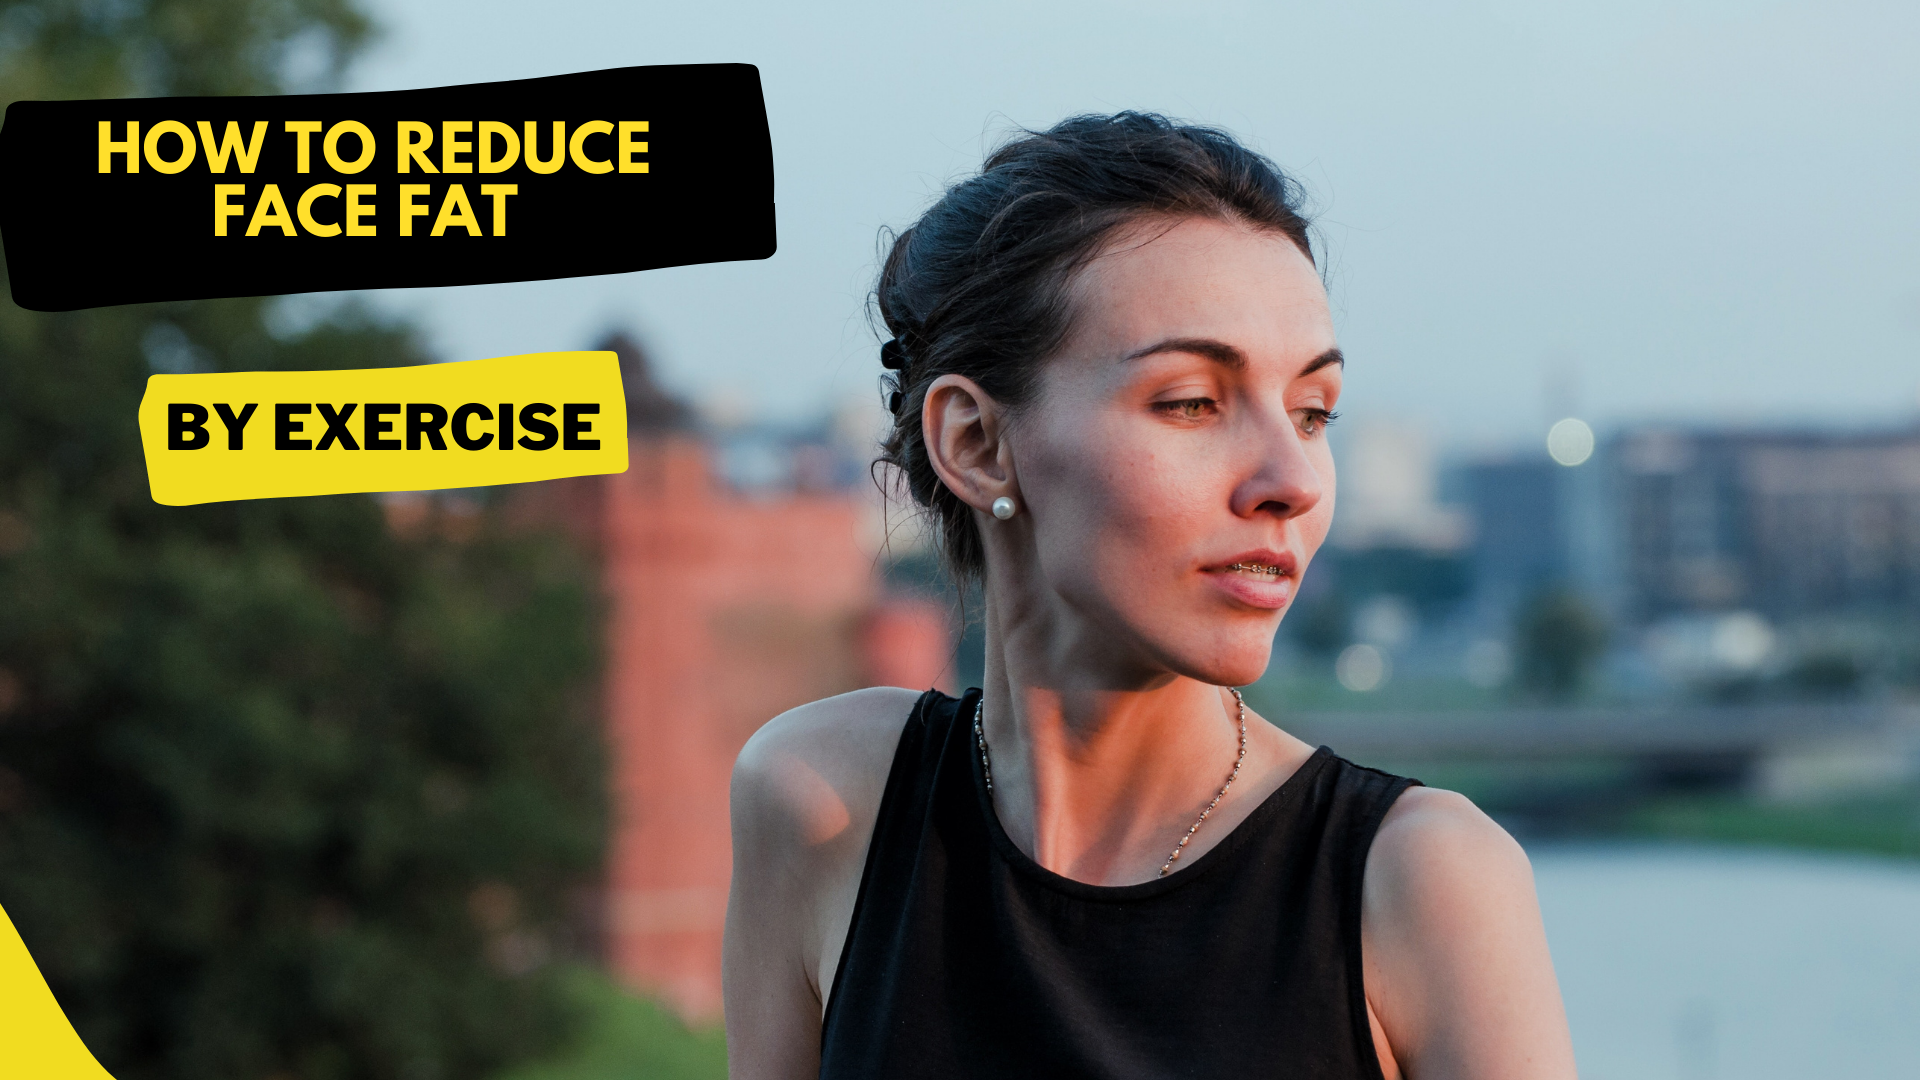 How to Reduce Face Fat by Exercise